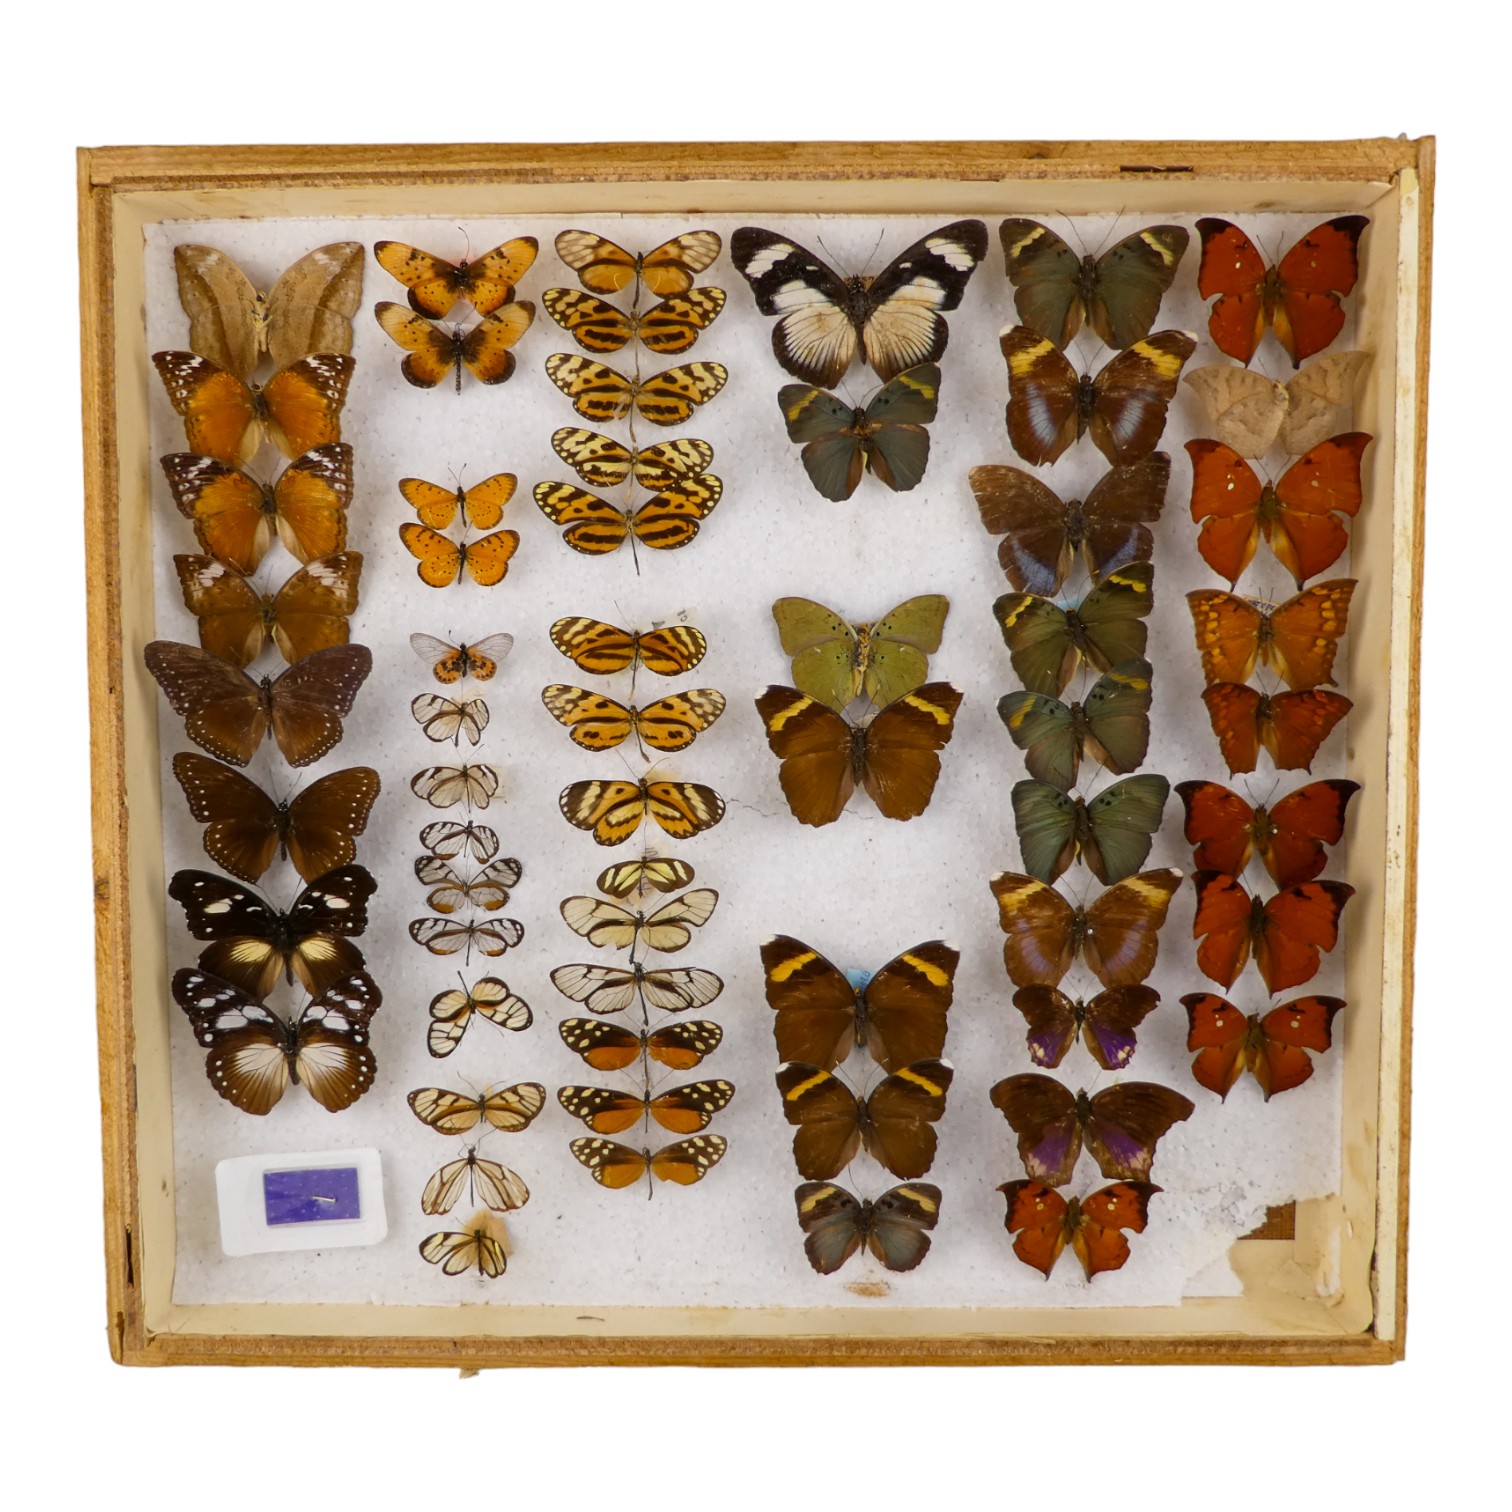 A case of butterflies in six rows - including Cramer's Leafwing, Dark Brown Forester and Jackson's